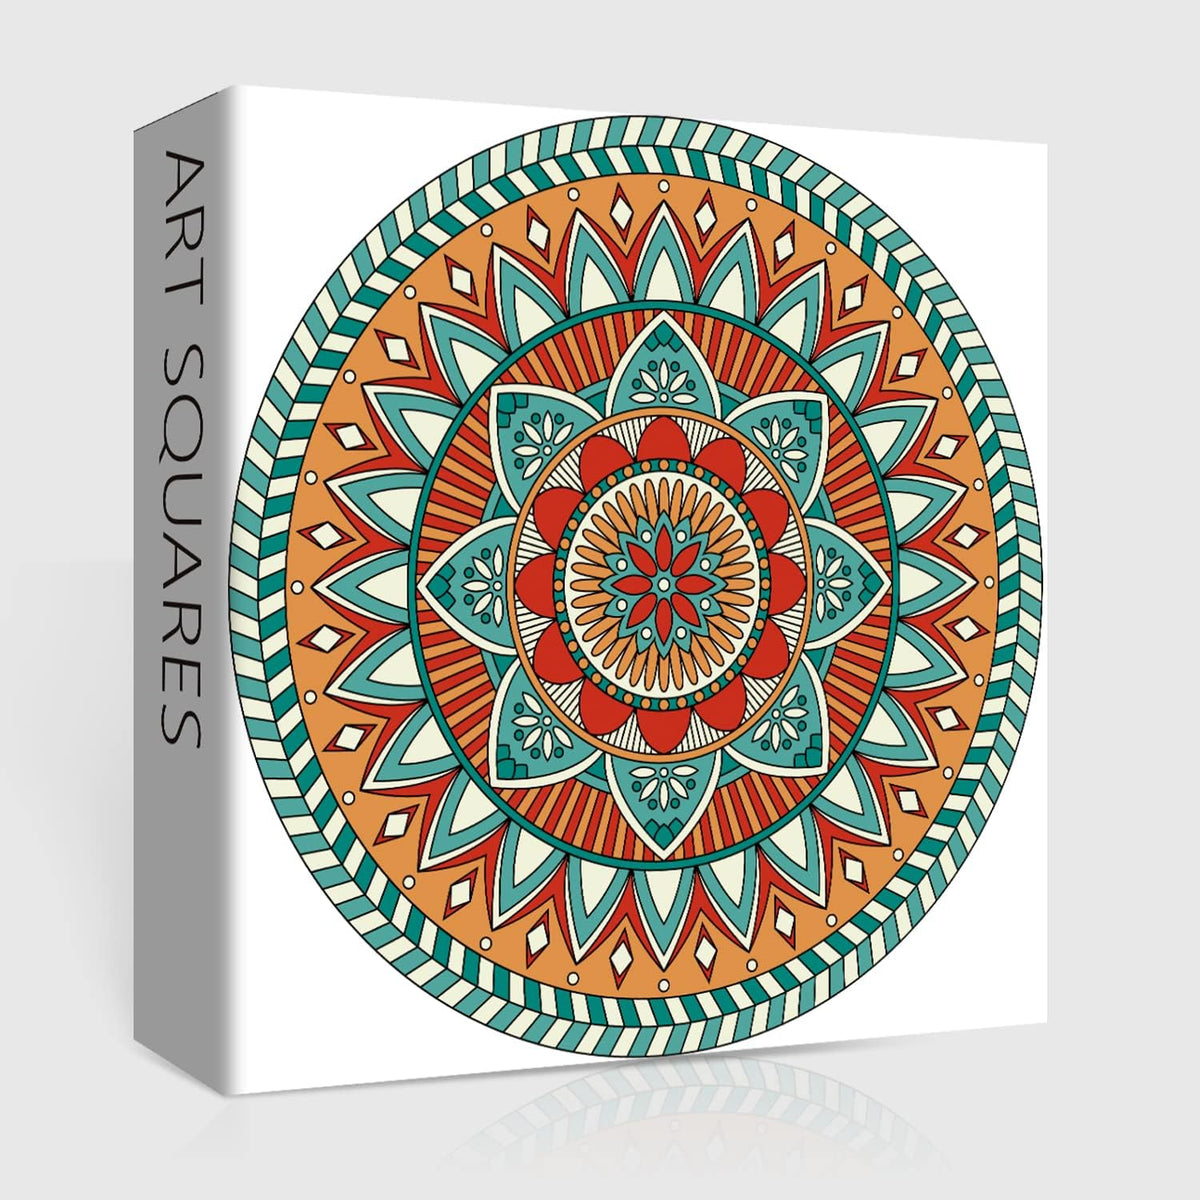 Blooming Flower Mandala Jigsaw Puzzles 1000 Pieces